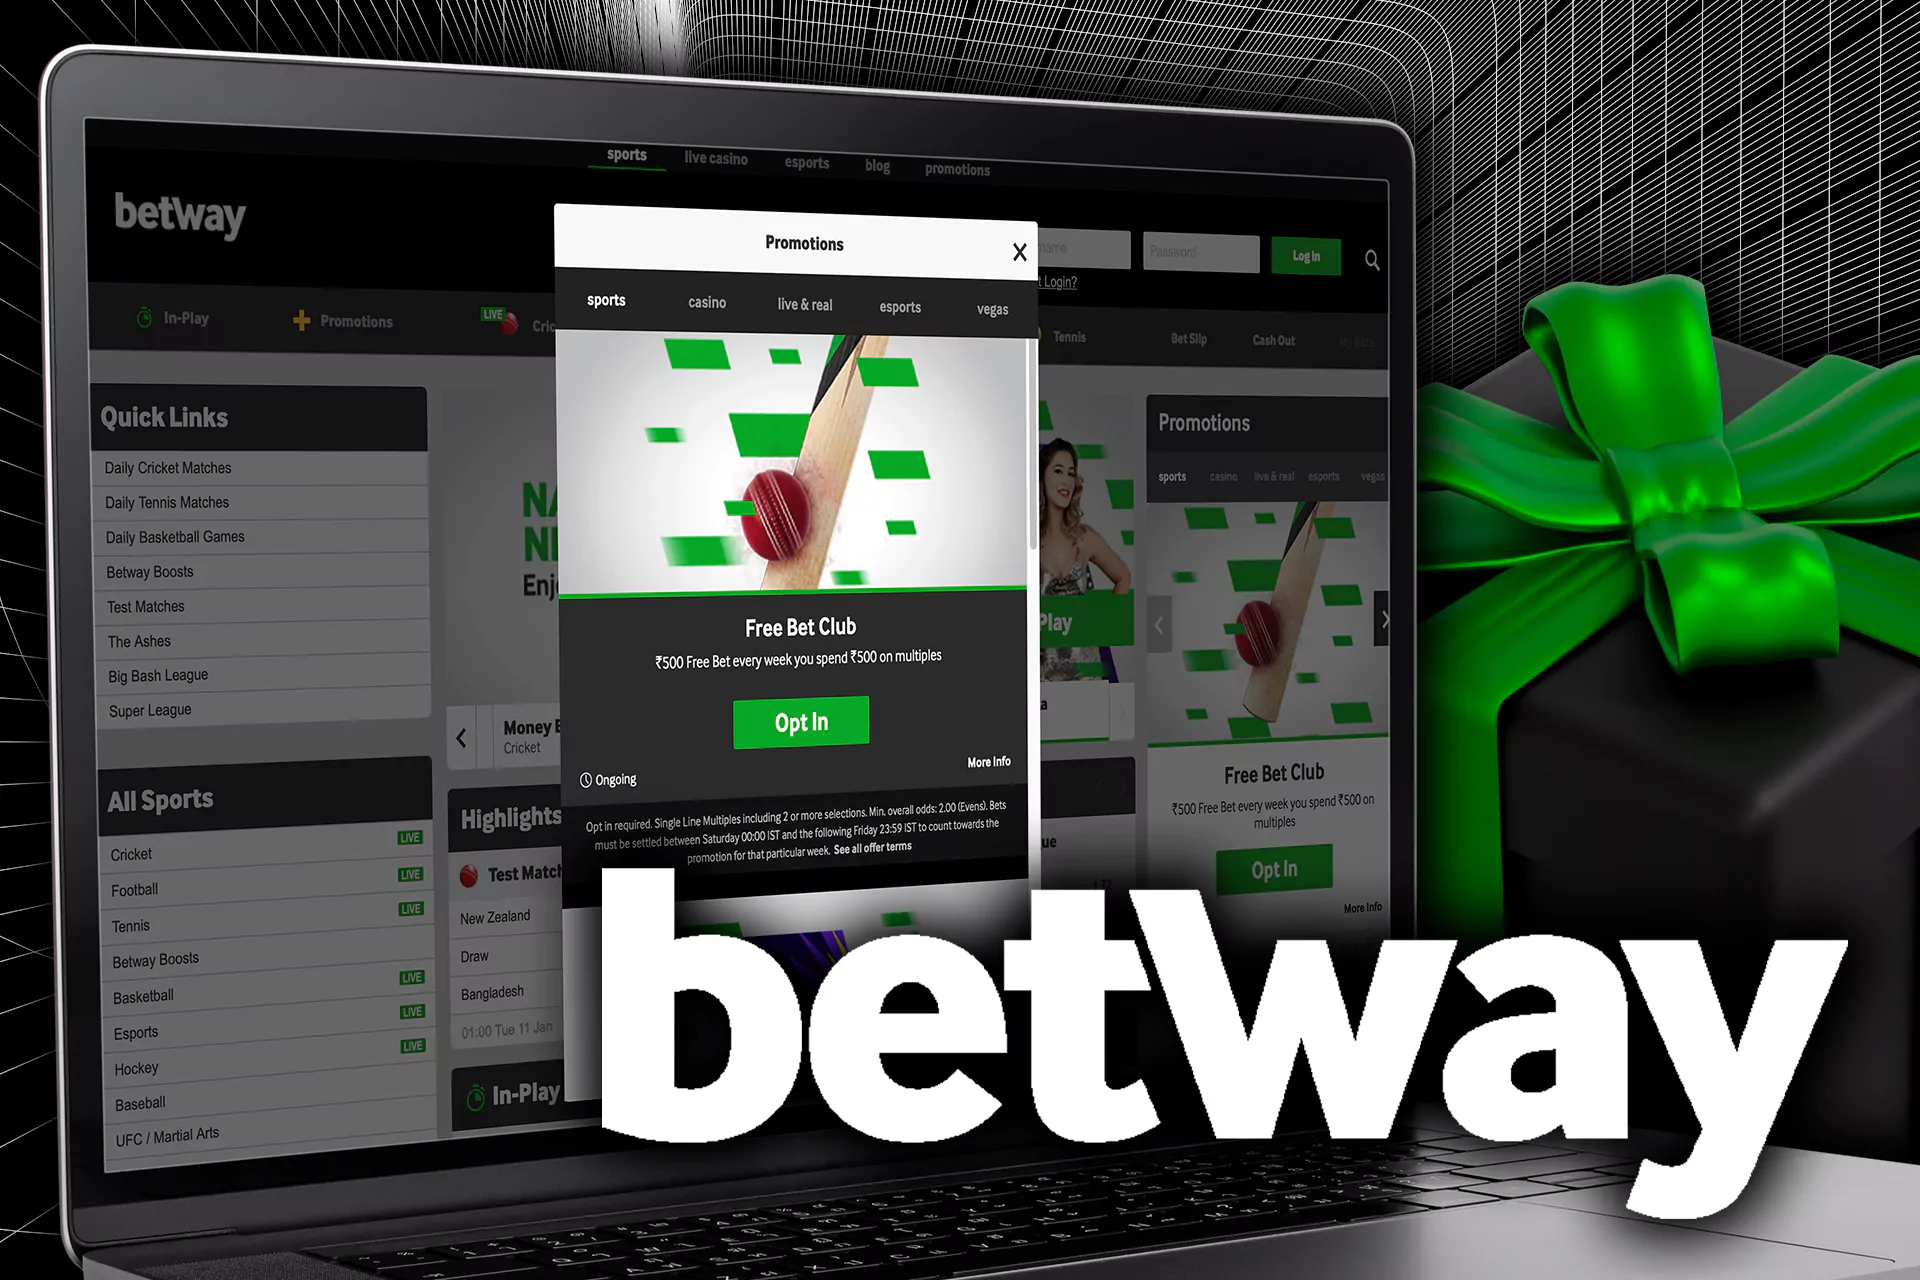 If you regularly place bets on Betway, you can become a member of the Loyalty Program.